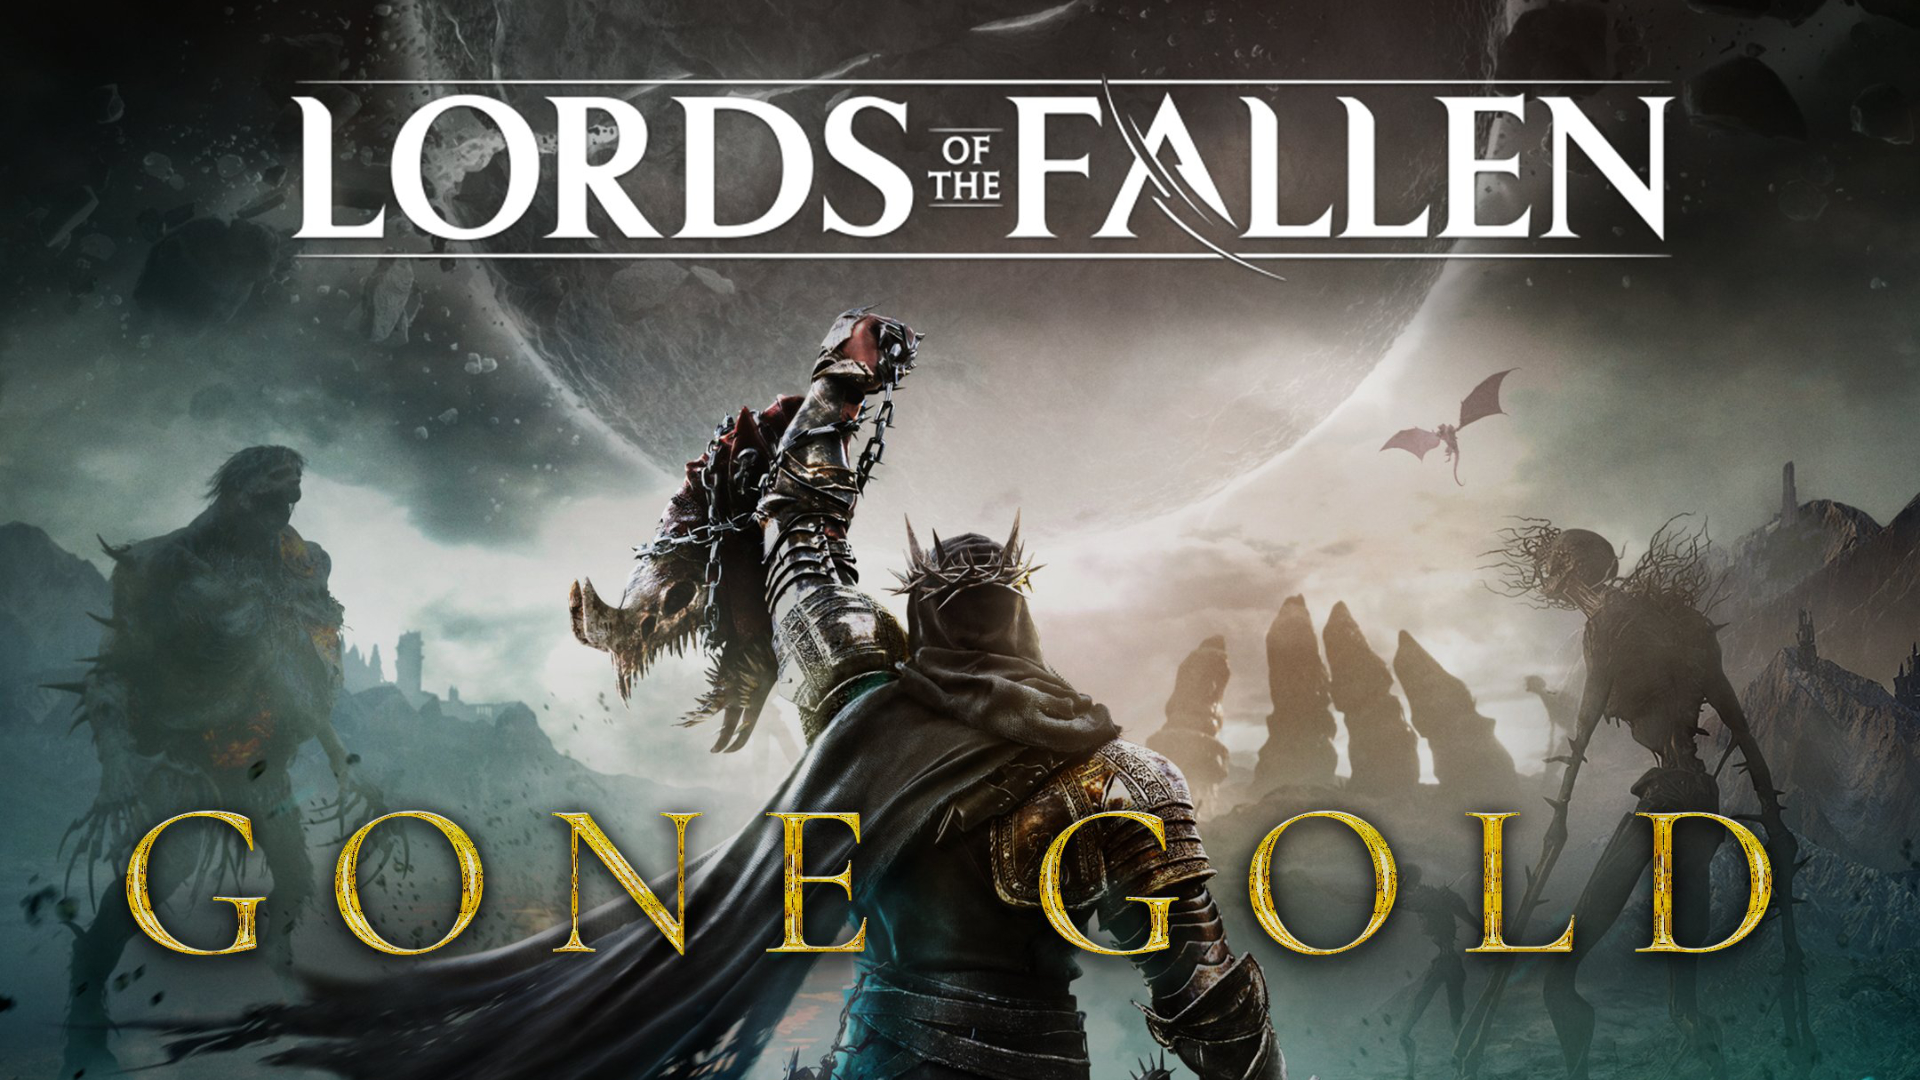 About The Lords of the Fallen